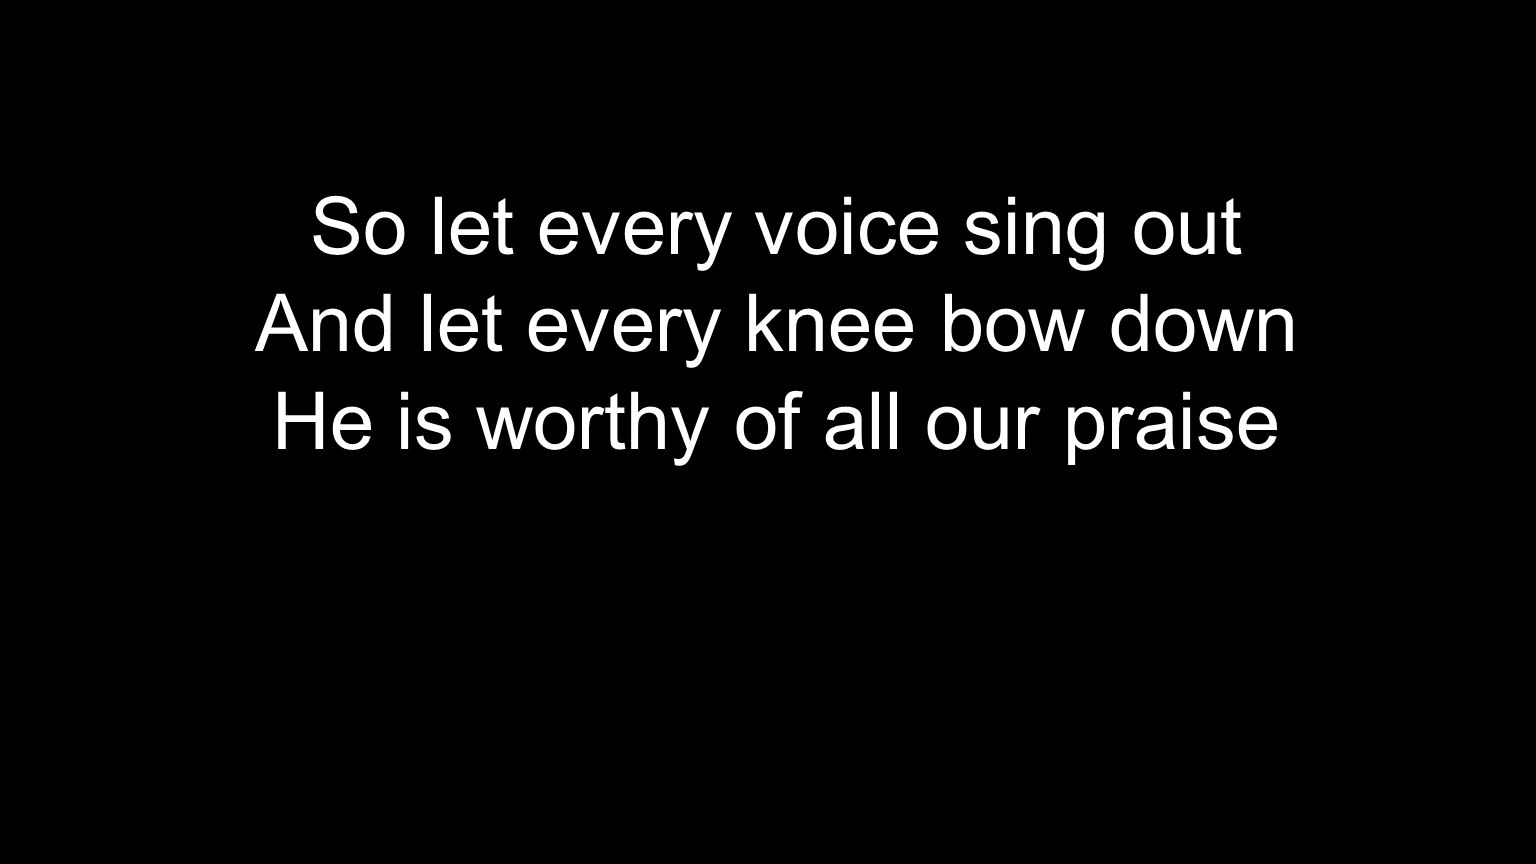 So let every voice sing out And let every knee bow down He is worthy of all our praise